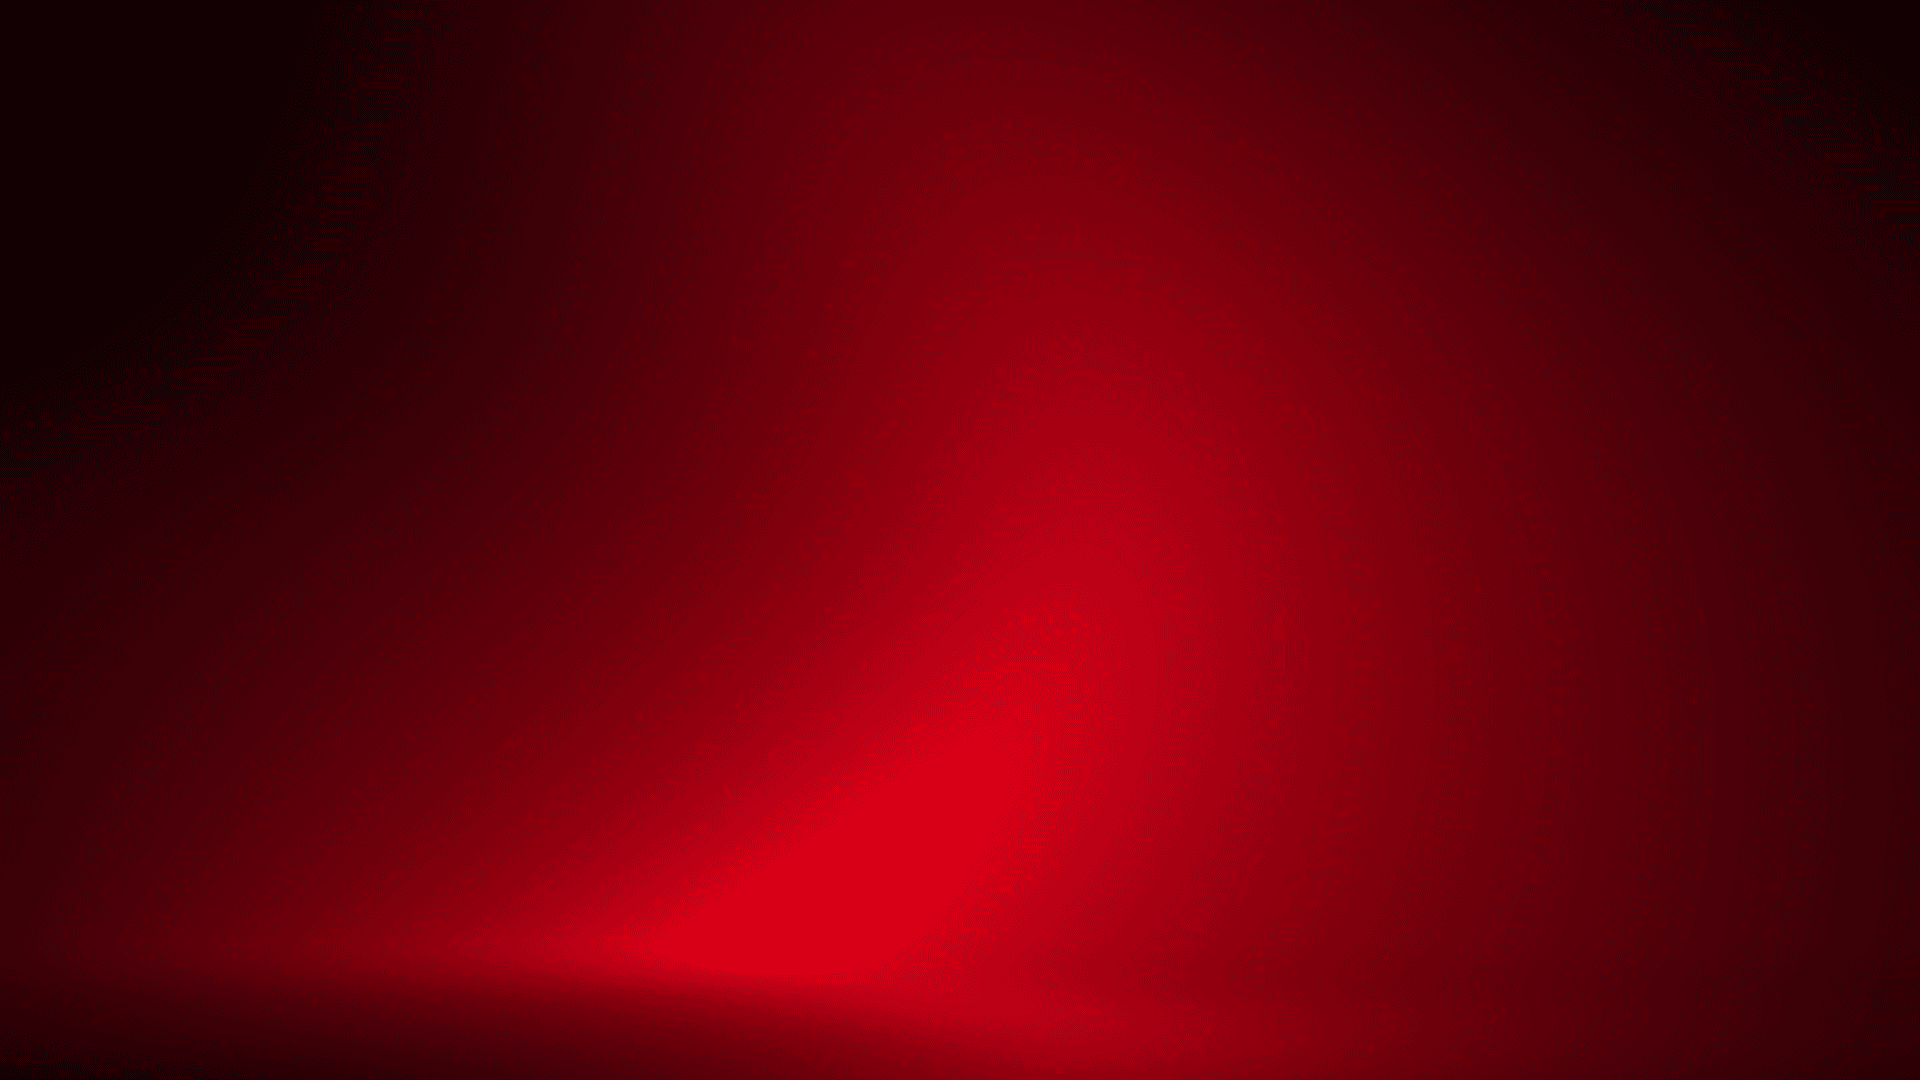 100+] Plain Red Wallpapers, background wallpaper red 